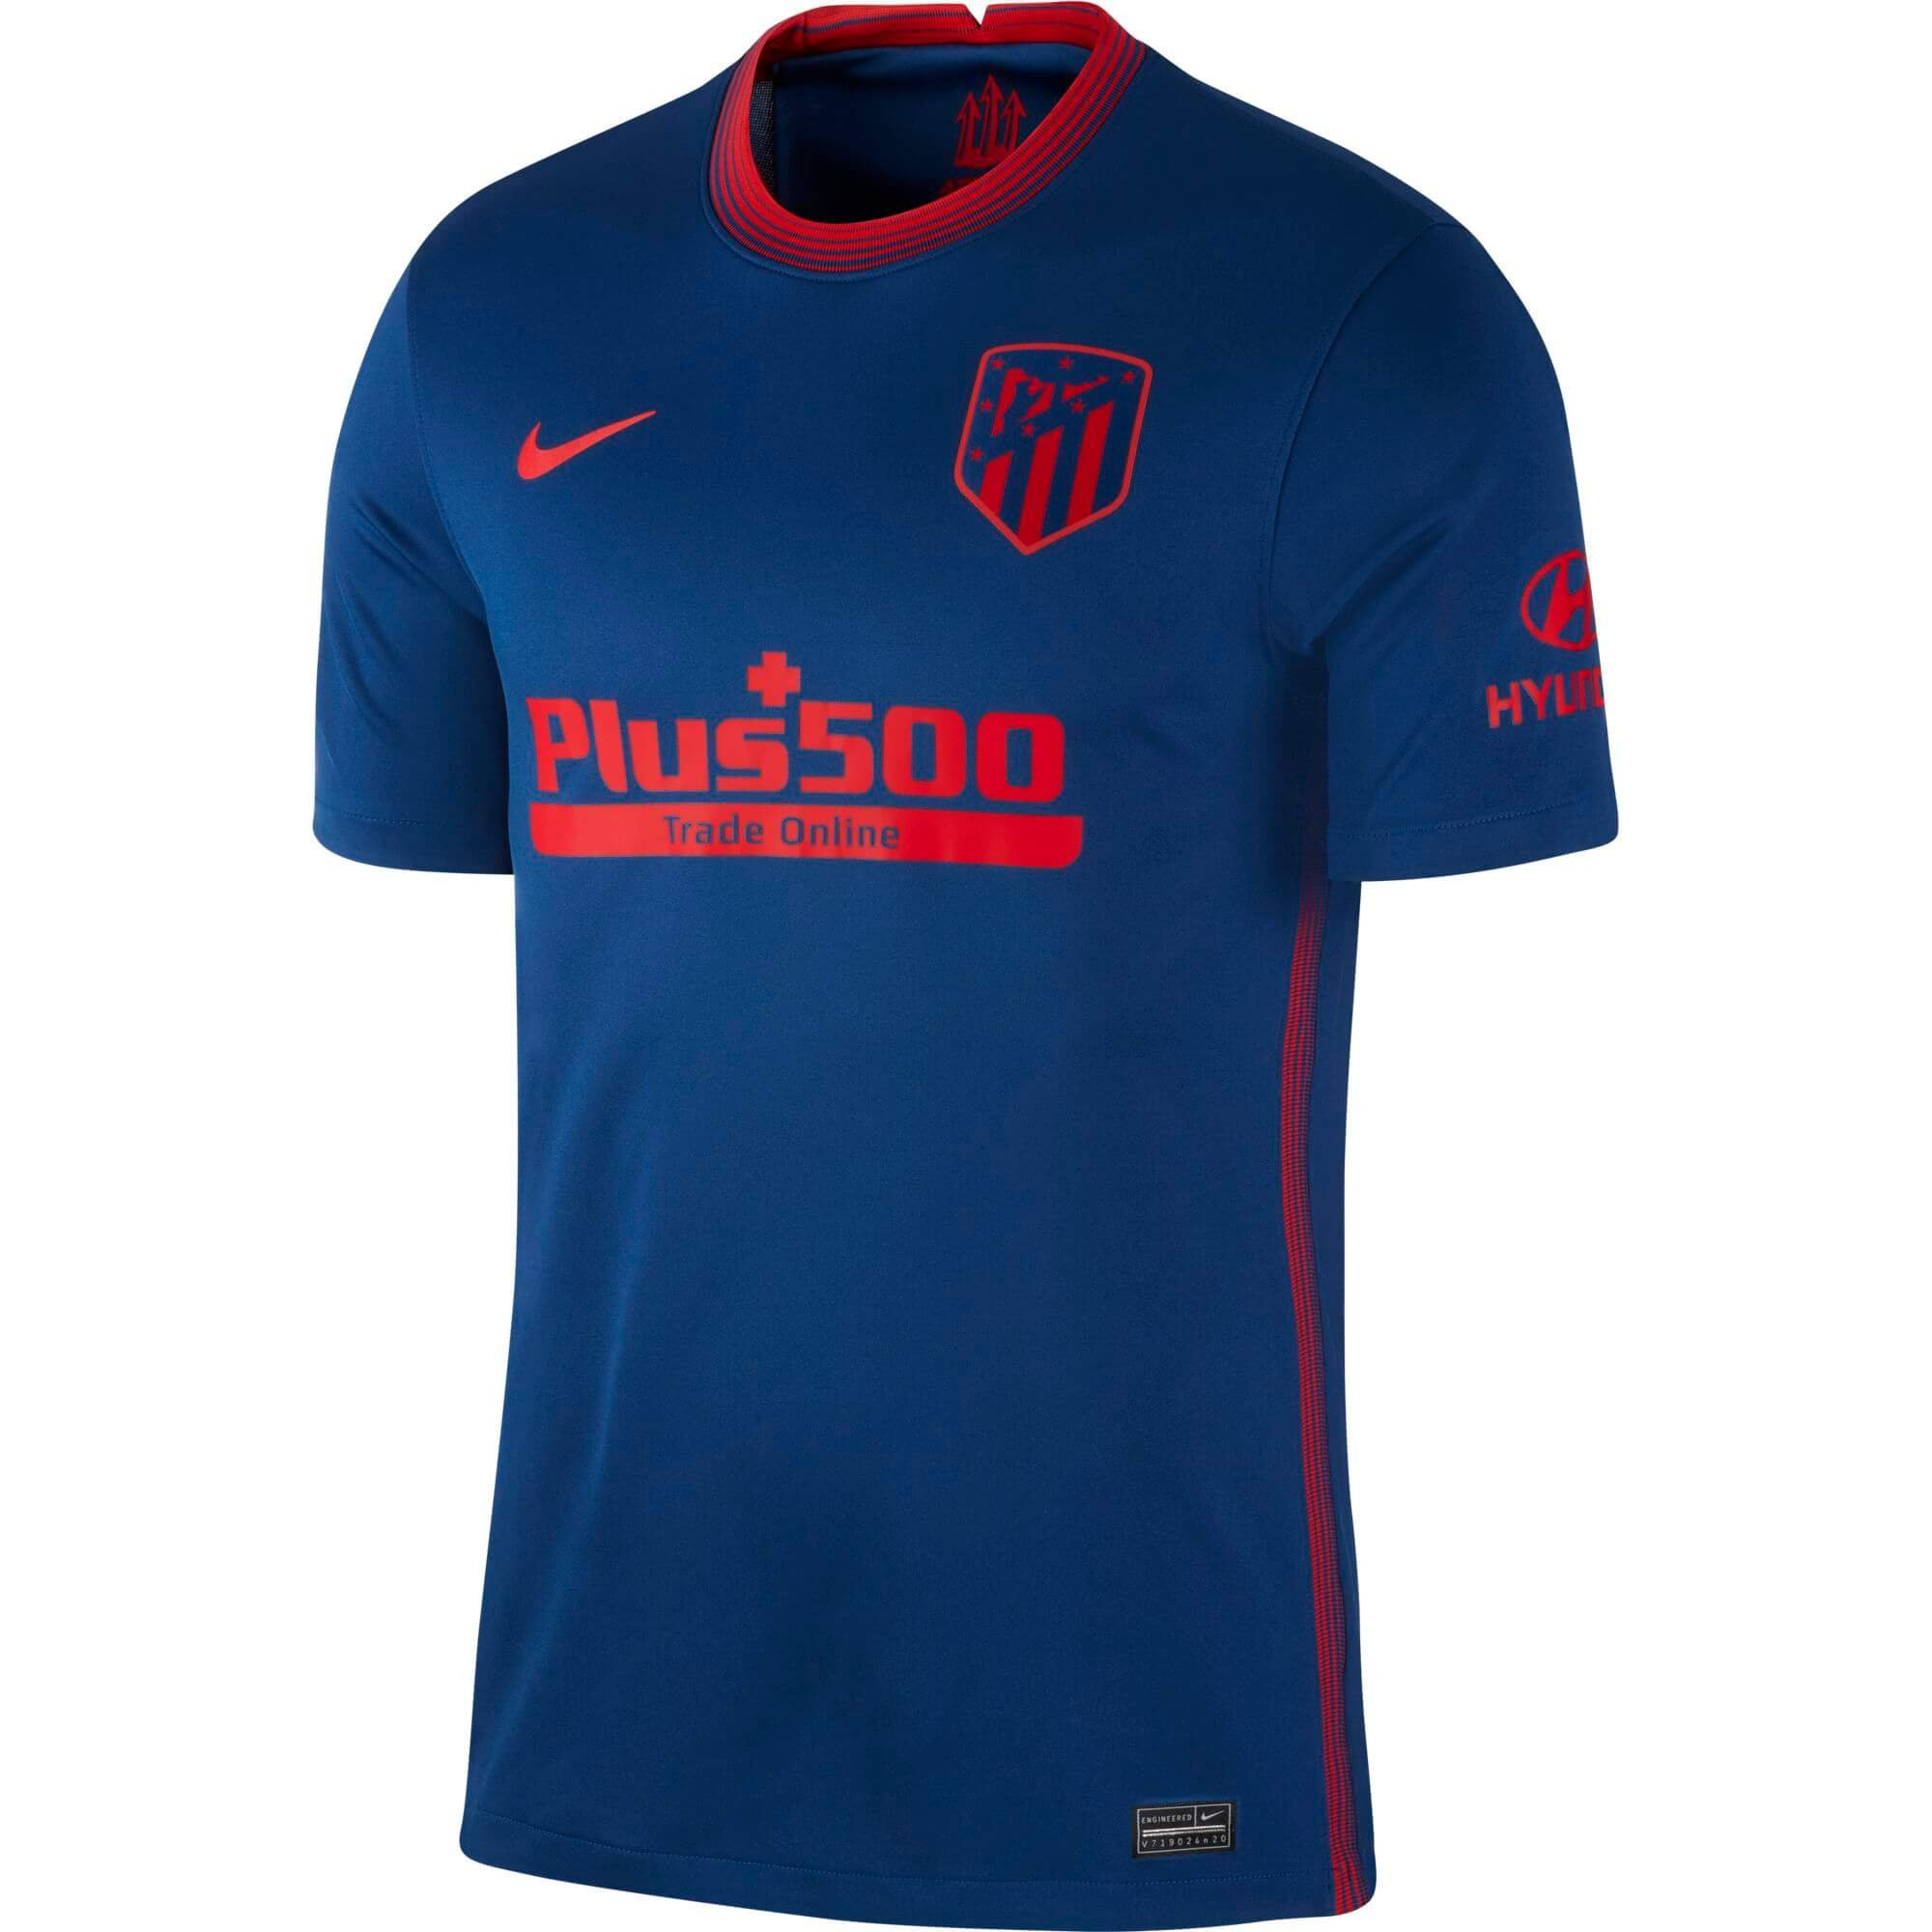 NIKE ATLETICO MADRID MAILLOT EXTERIEUR 2020/2021